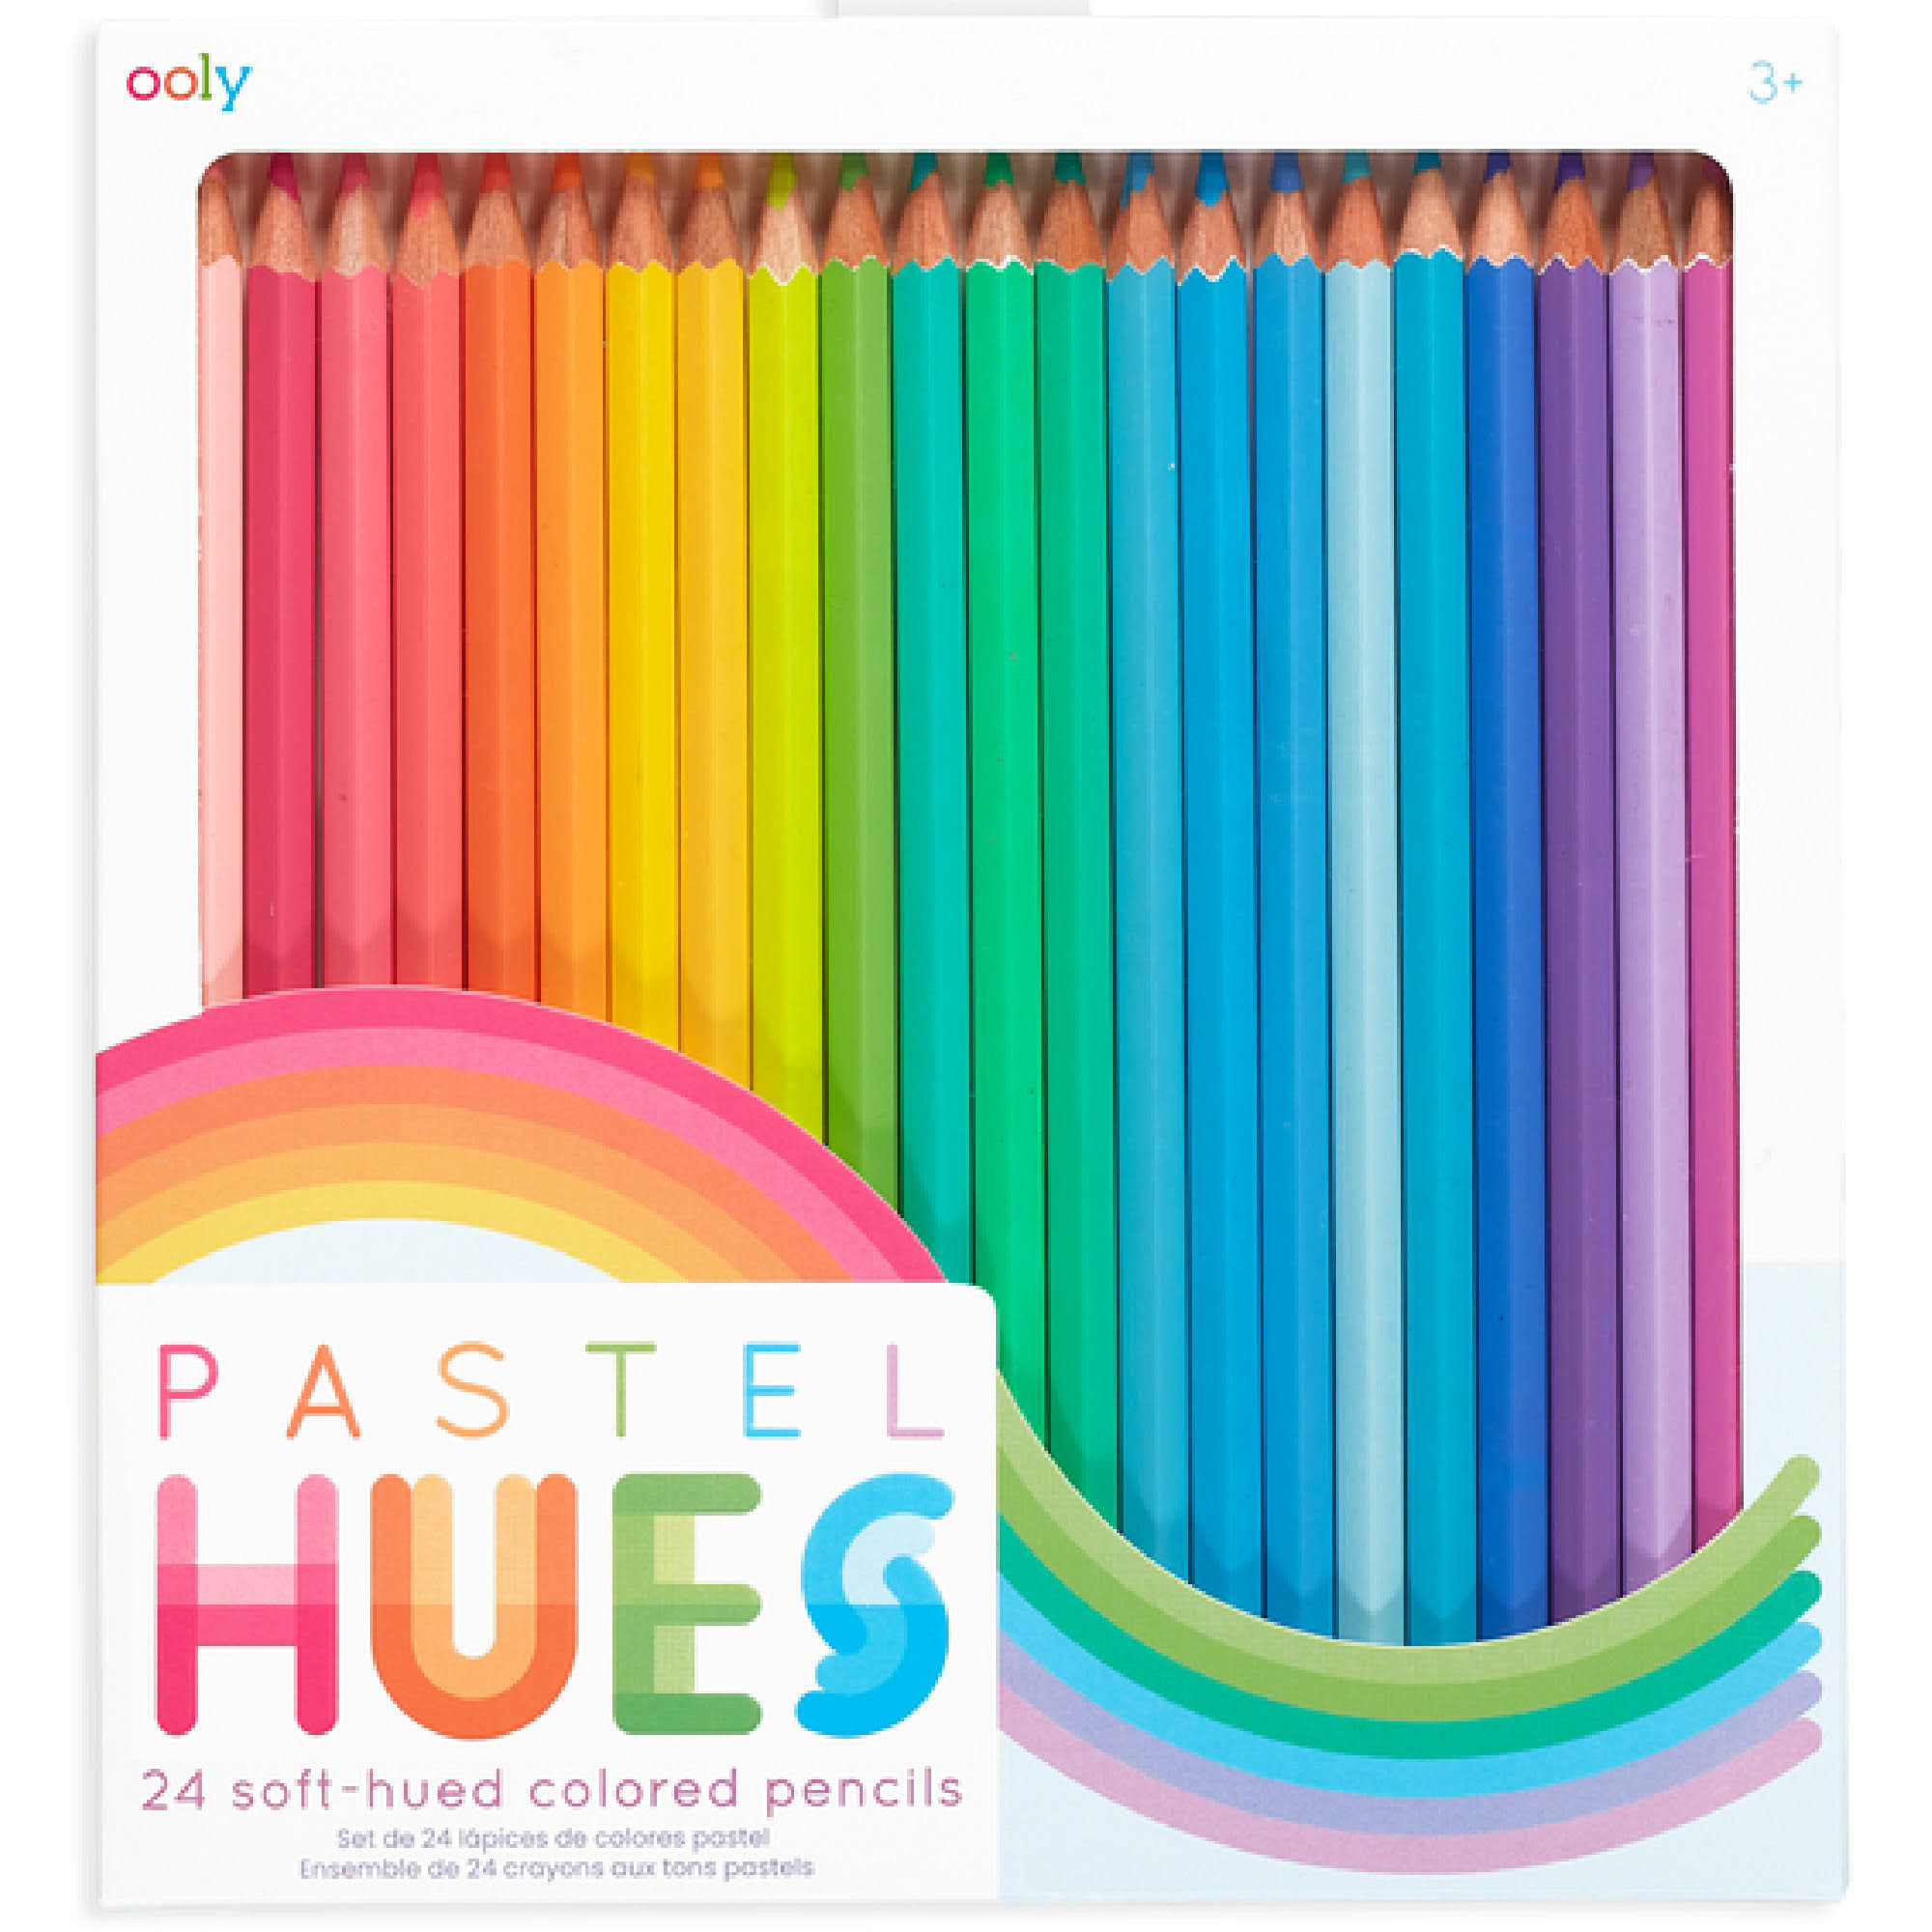 Ooly Pastel Hues Colored Pencil - Set of 24 One-Size